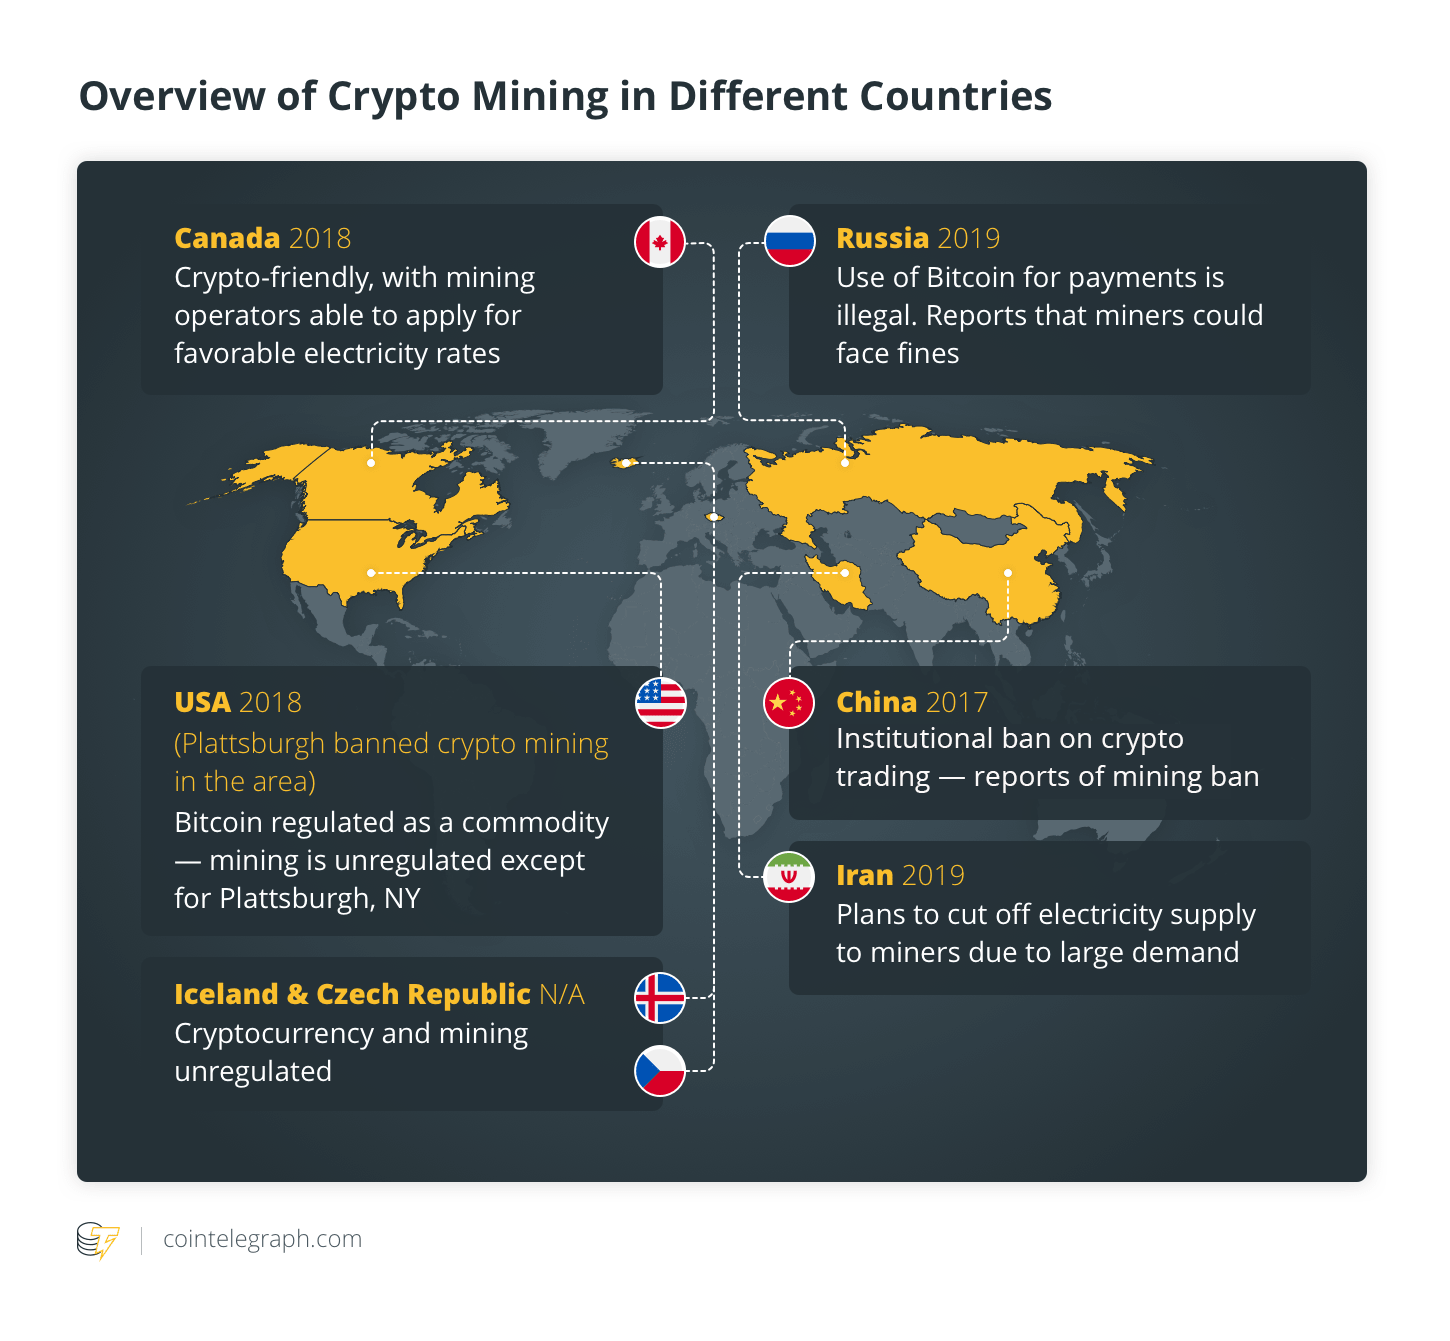 Overview of Crypto Mining in Different Countries